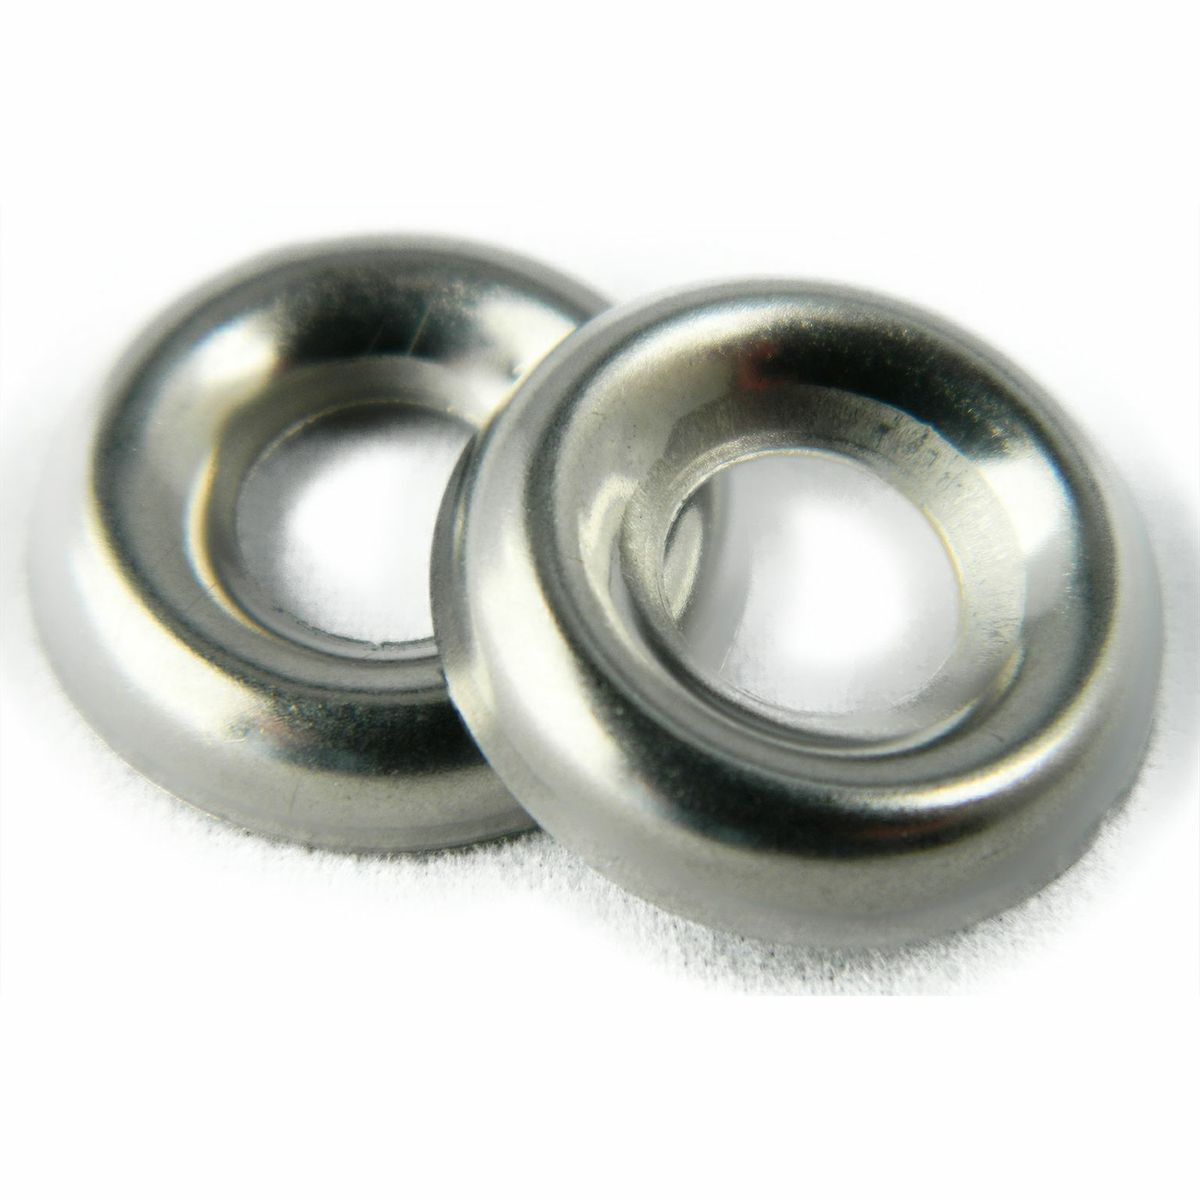 Stainless Steel Cup Washer Finishing Countersunk #12 Qty 100